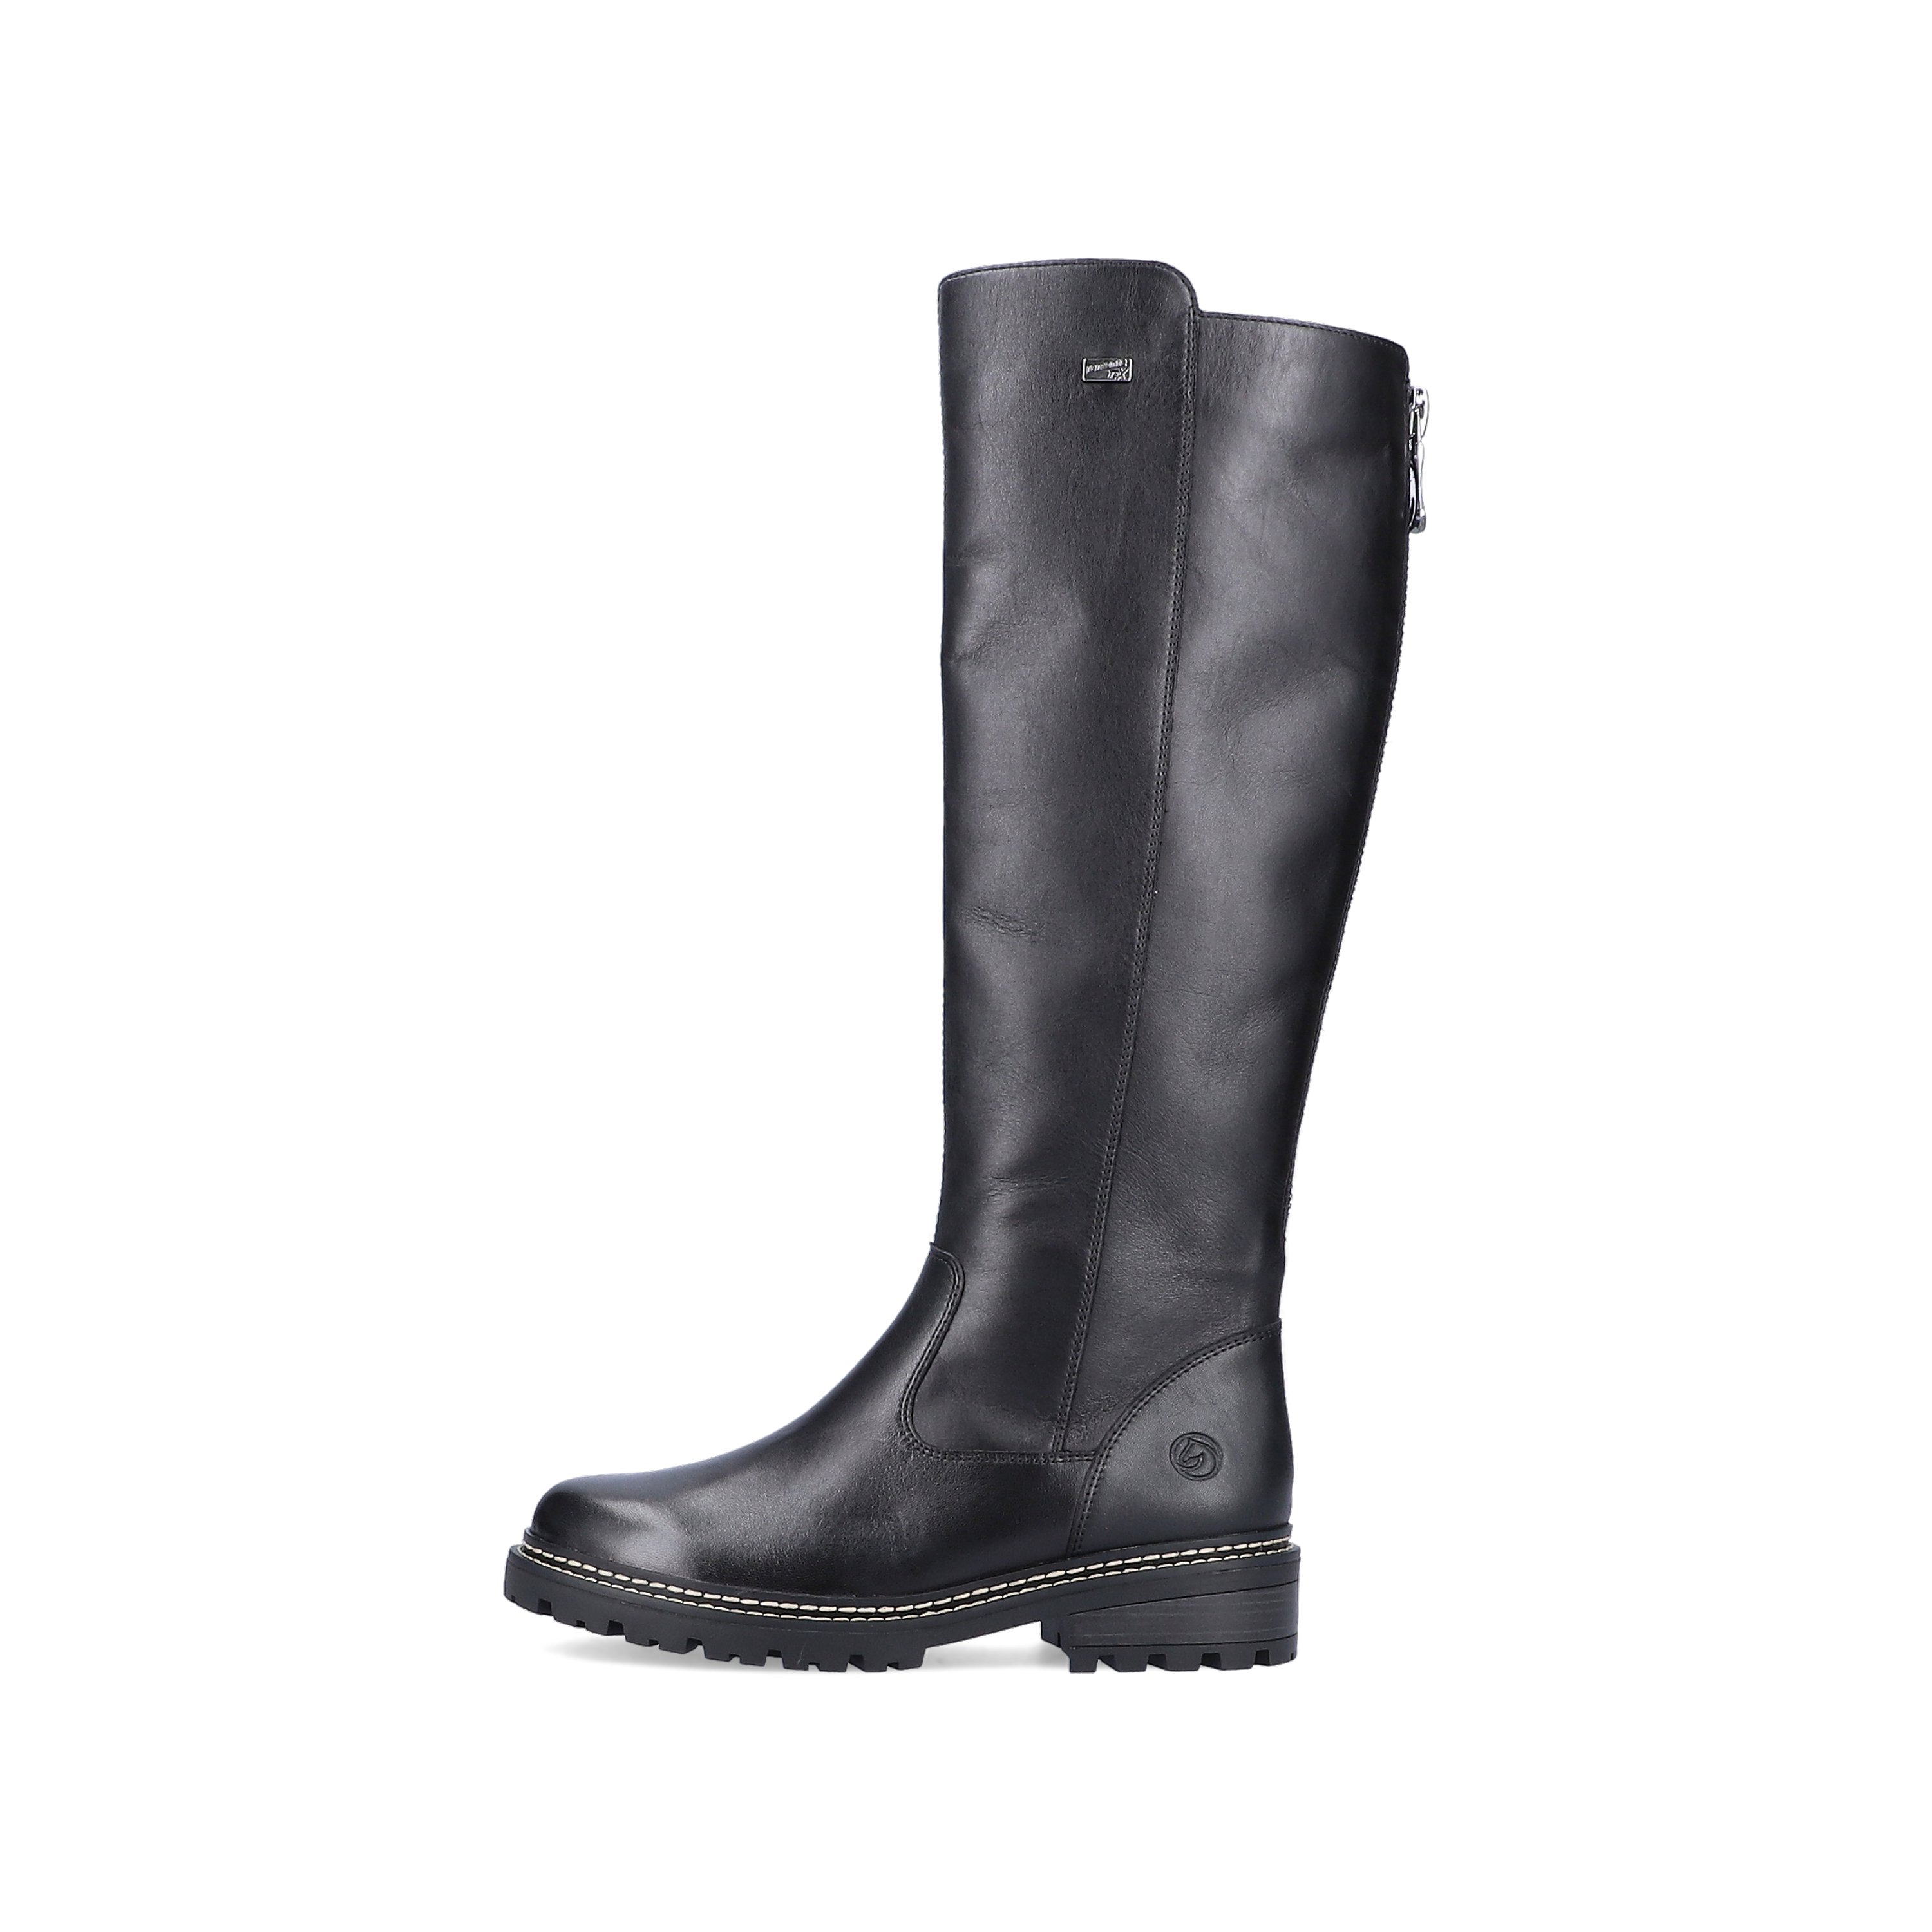 Asphalt black remonte women´s high boots D0B72-01 with cushioning profile sole. The outside of the shoe